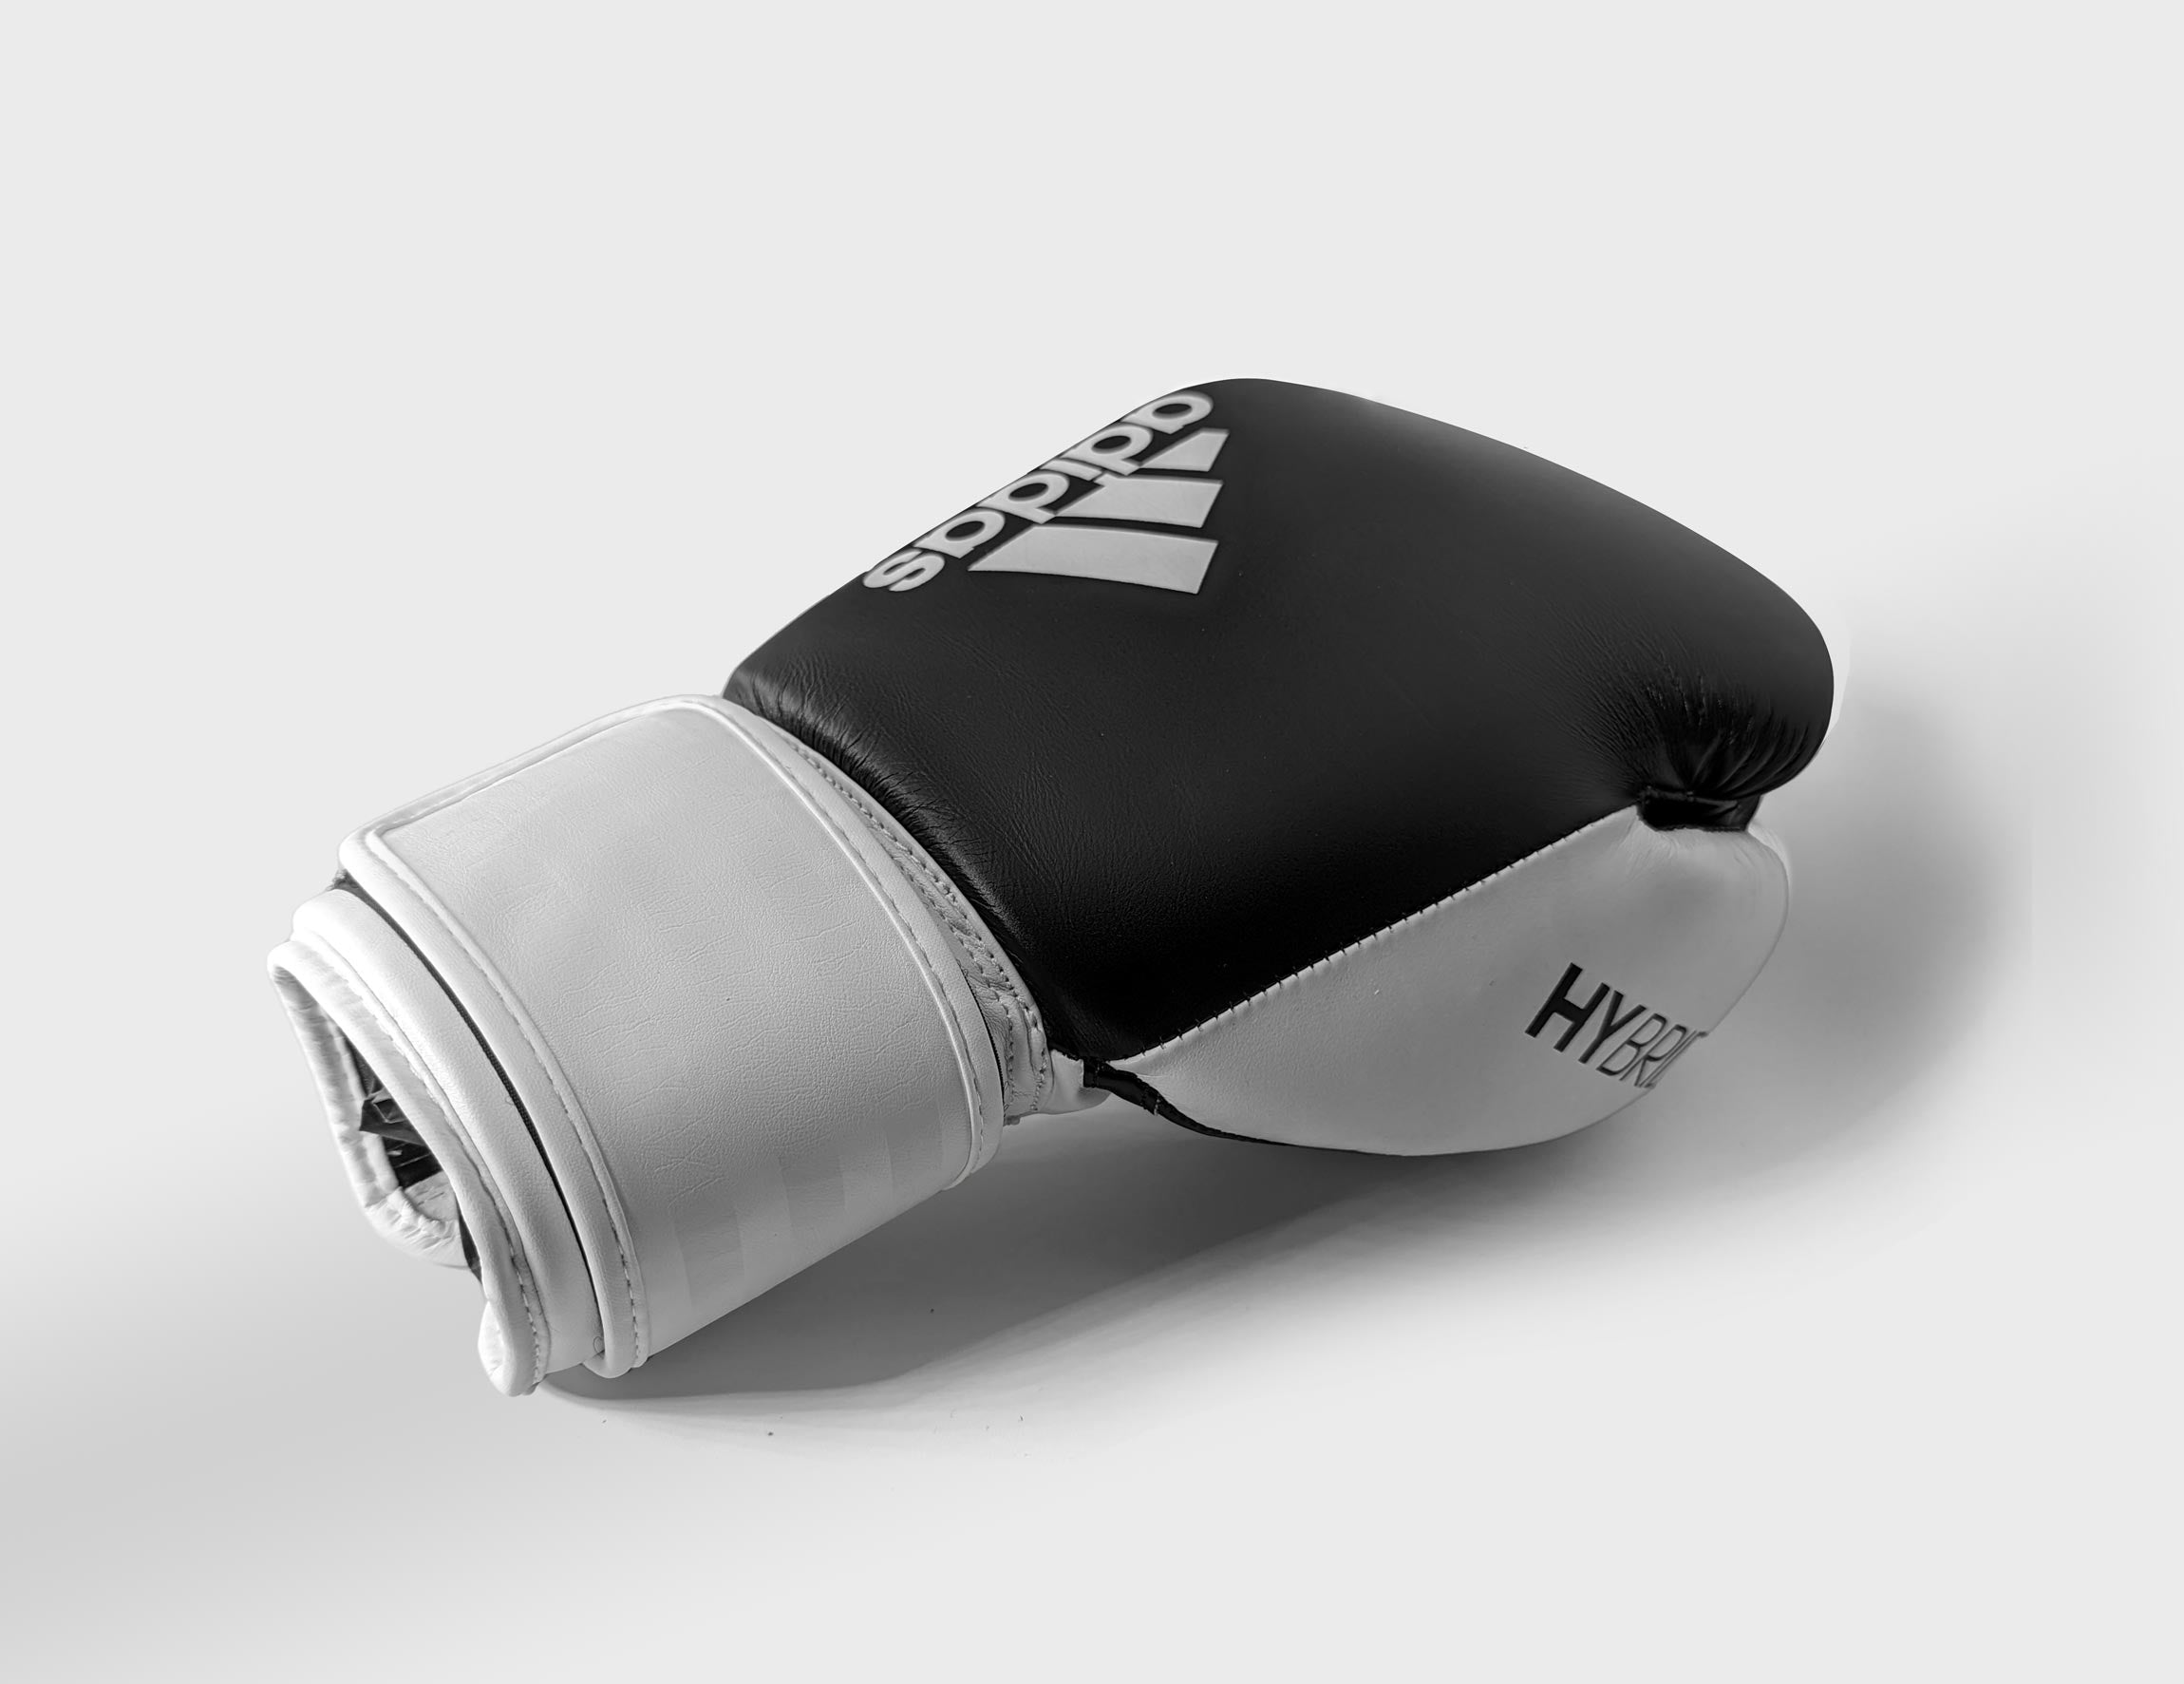 Product image of Adidas Hybrid 200 Boxing Gloves available at ATL Fight Shop. Shop online or in-store at our Roswell, GA location.